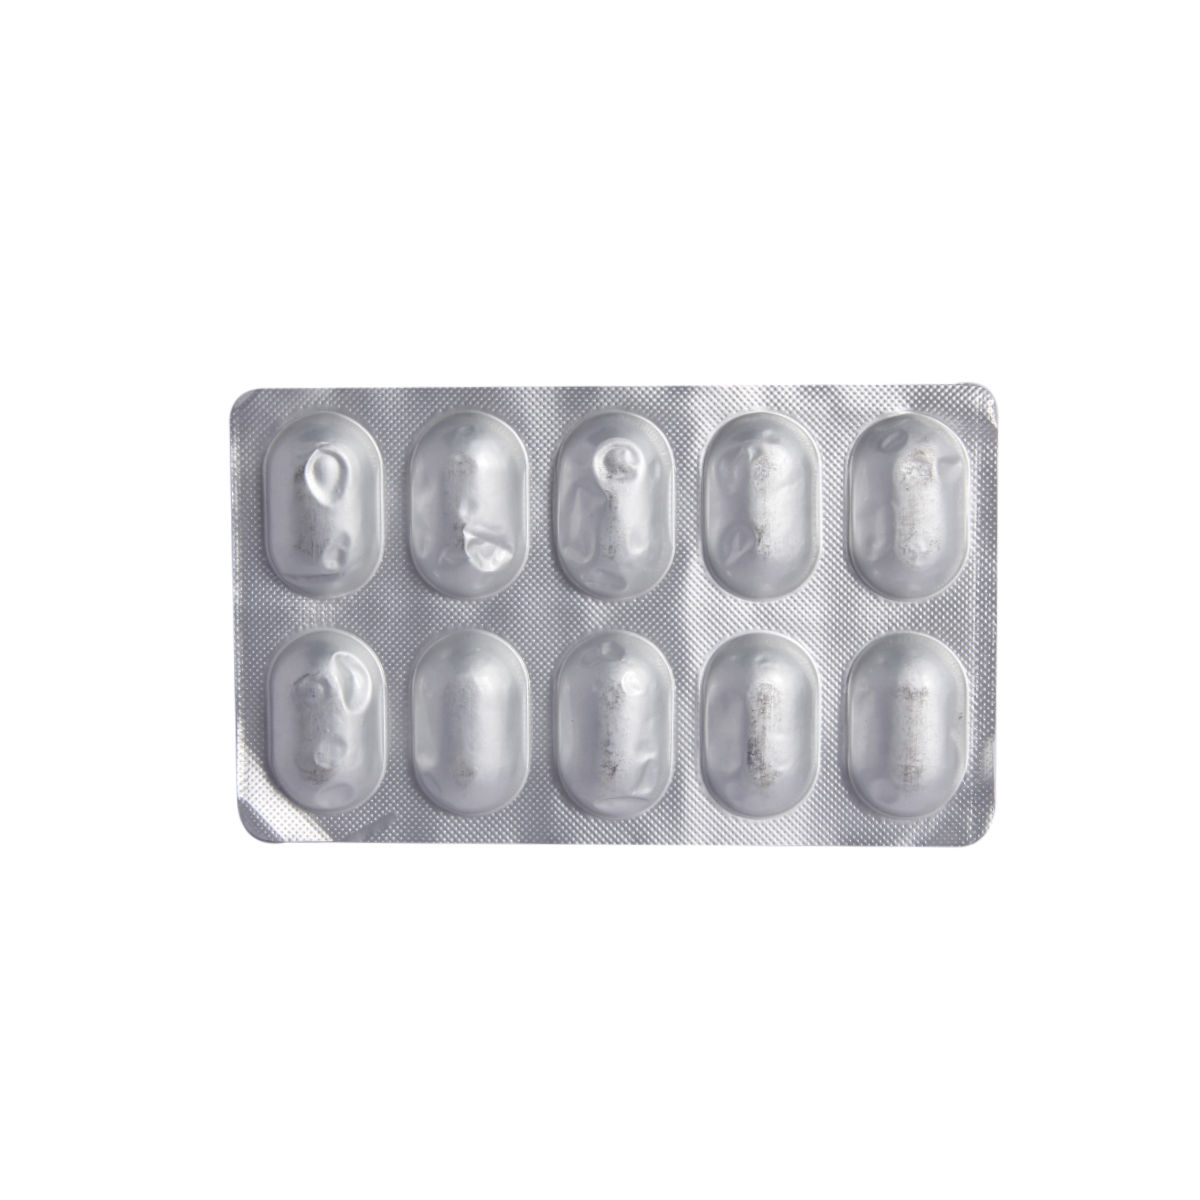 Bubca Tablet 10's, Pack of 10 S